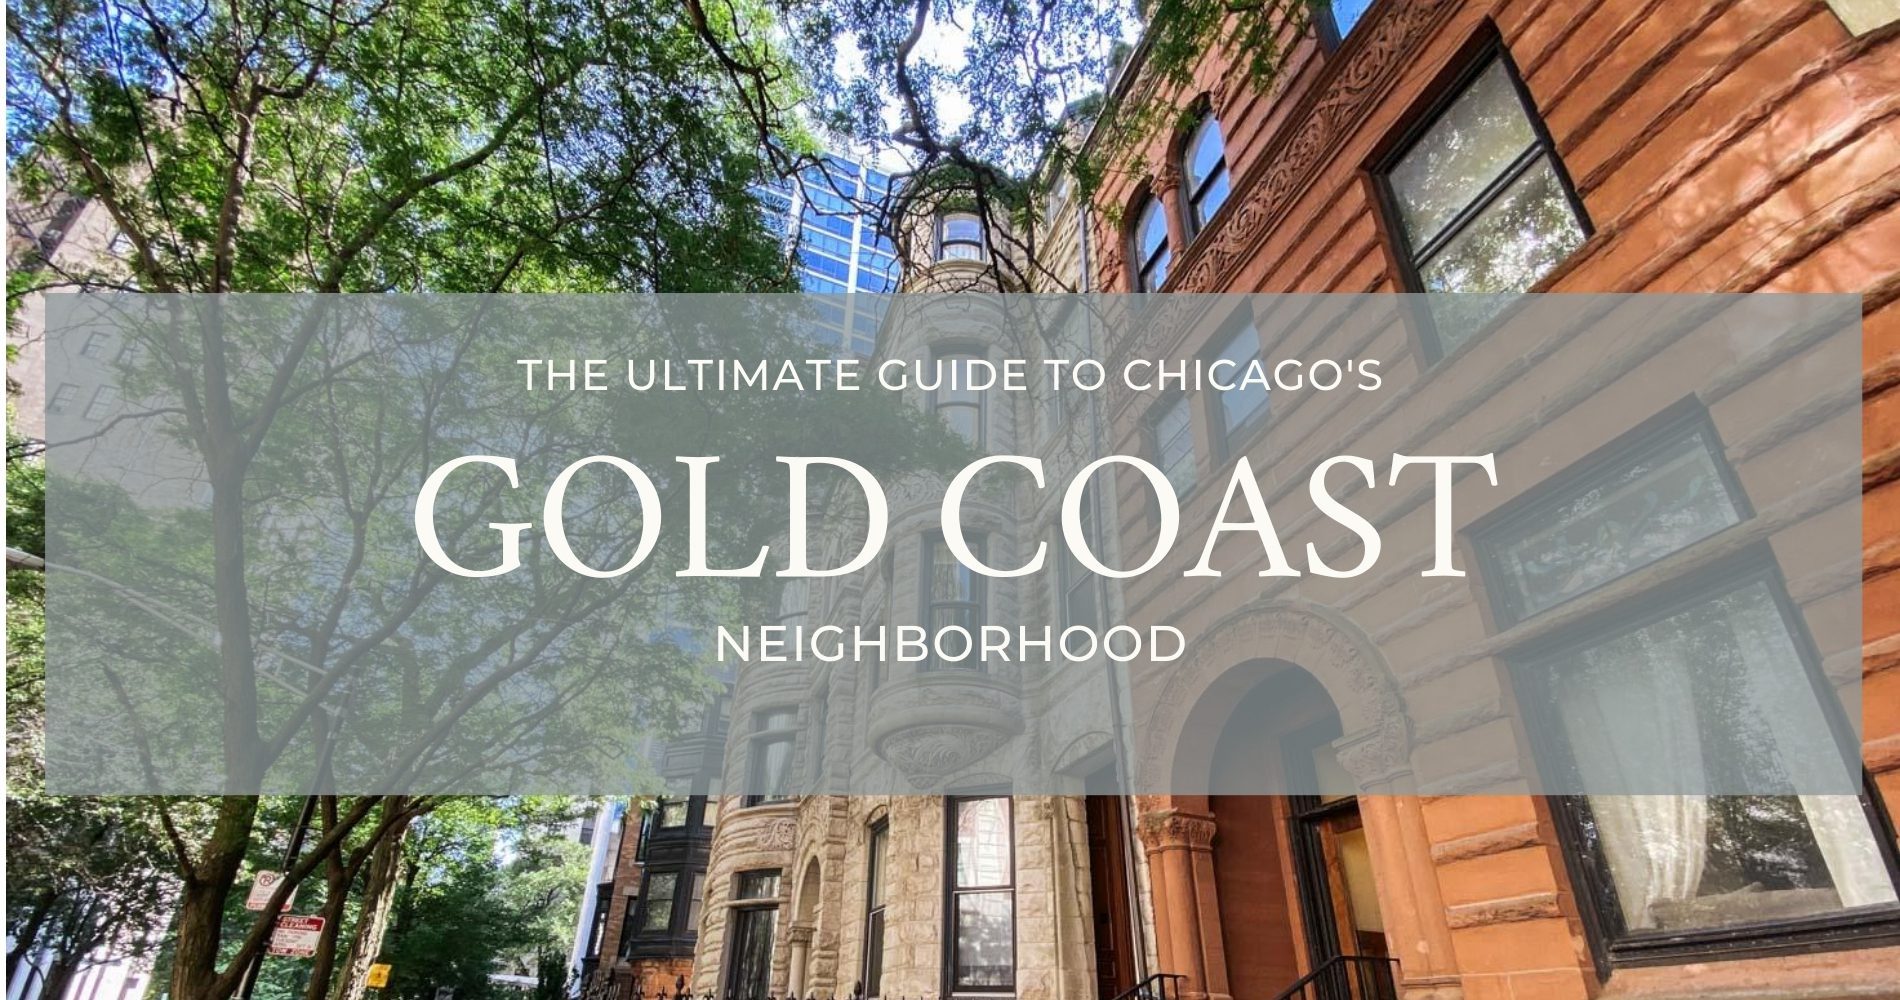 The Ultimate Guide to Chicago's Gold Coast Neighborhood